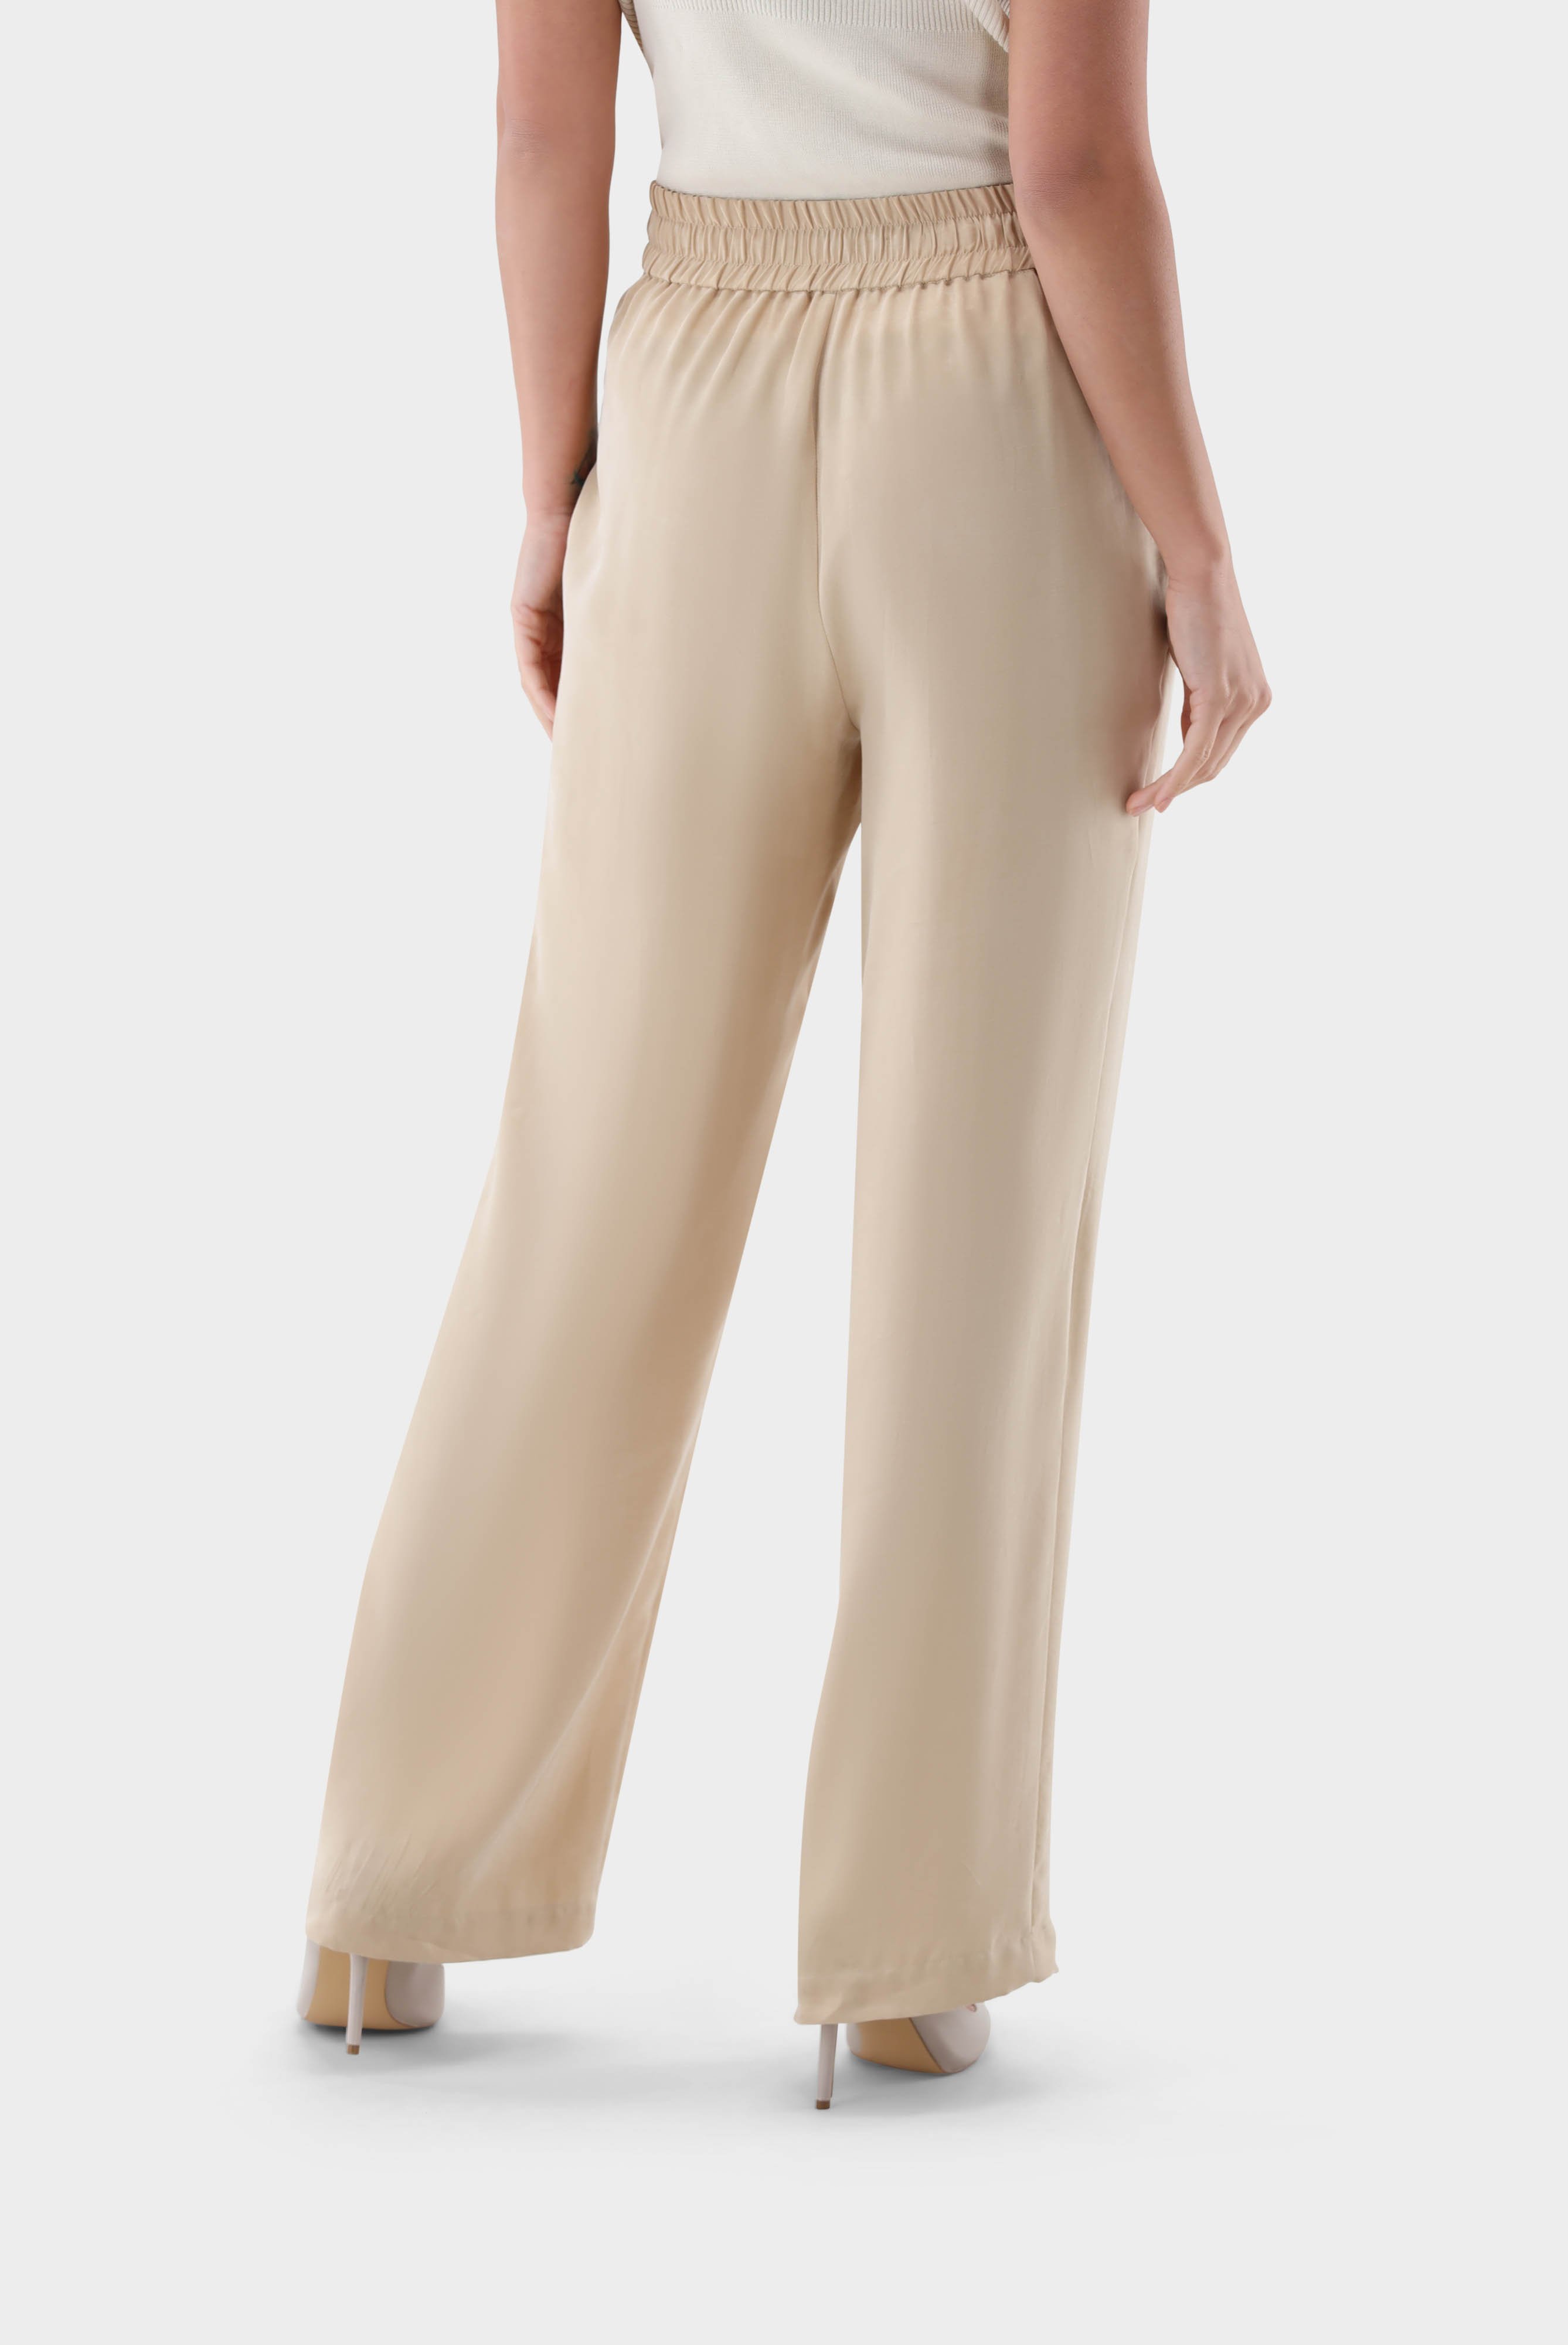 Jeans & Trousers+Palazzo trousers+05.6743..155007.250.32